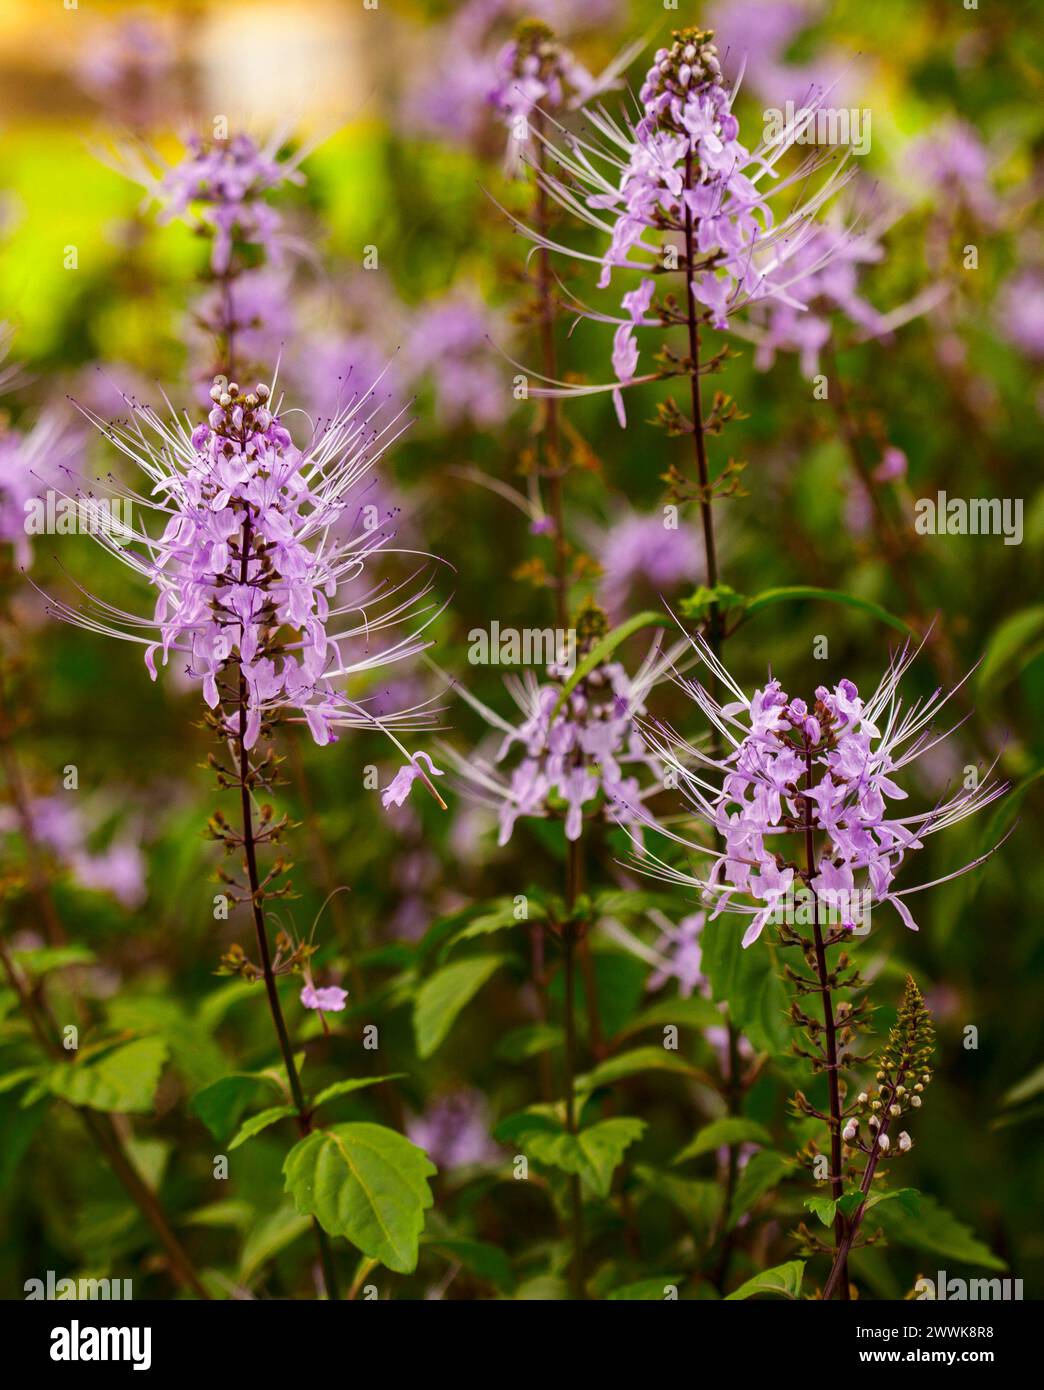 Australian native perennial plant, Orthosiphon aristatus, Cat's Whiskers, with mauve / pink flowers and dark green leaves, growing in a garden Stock Photo